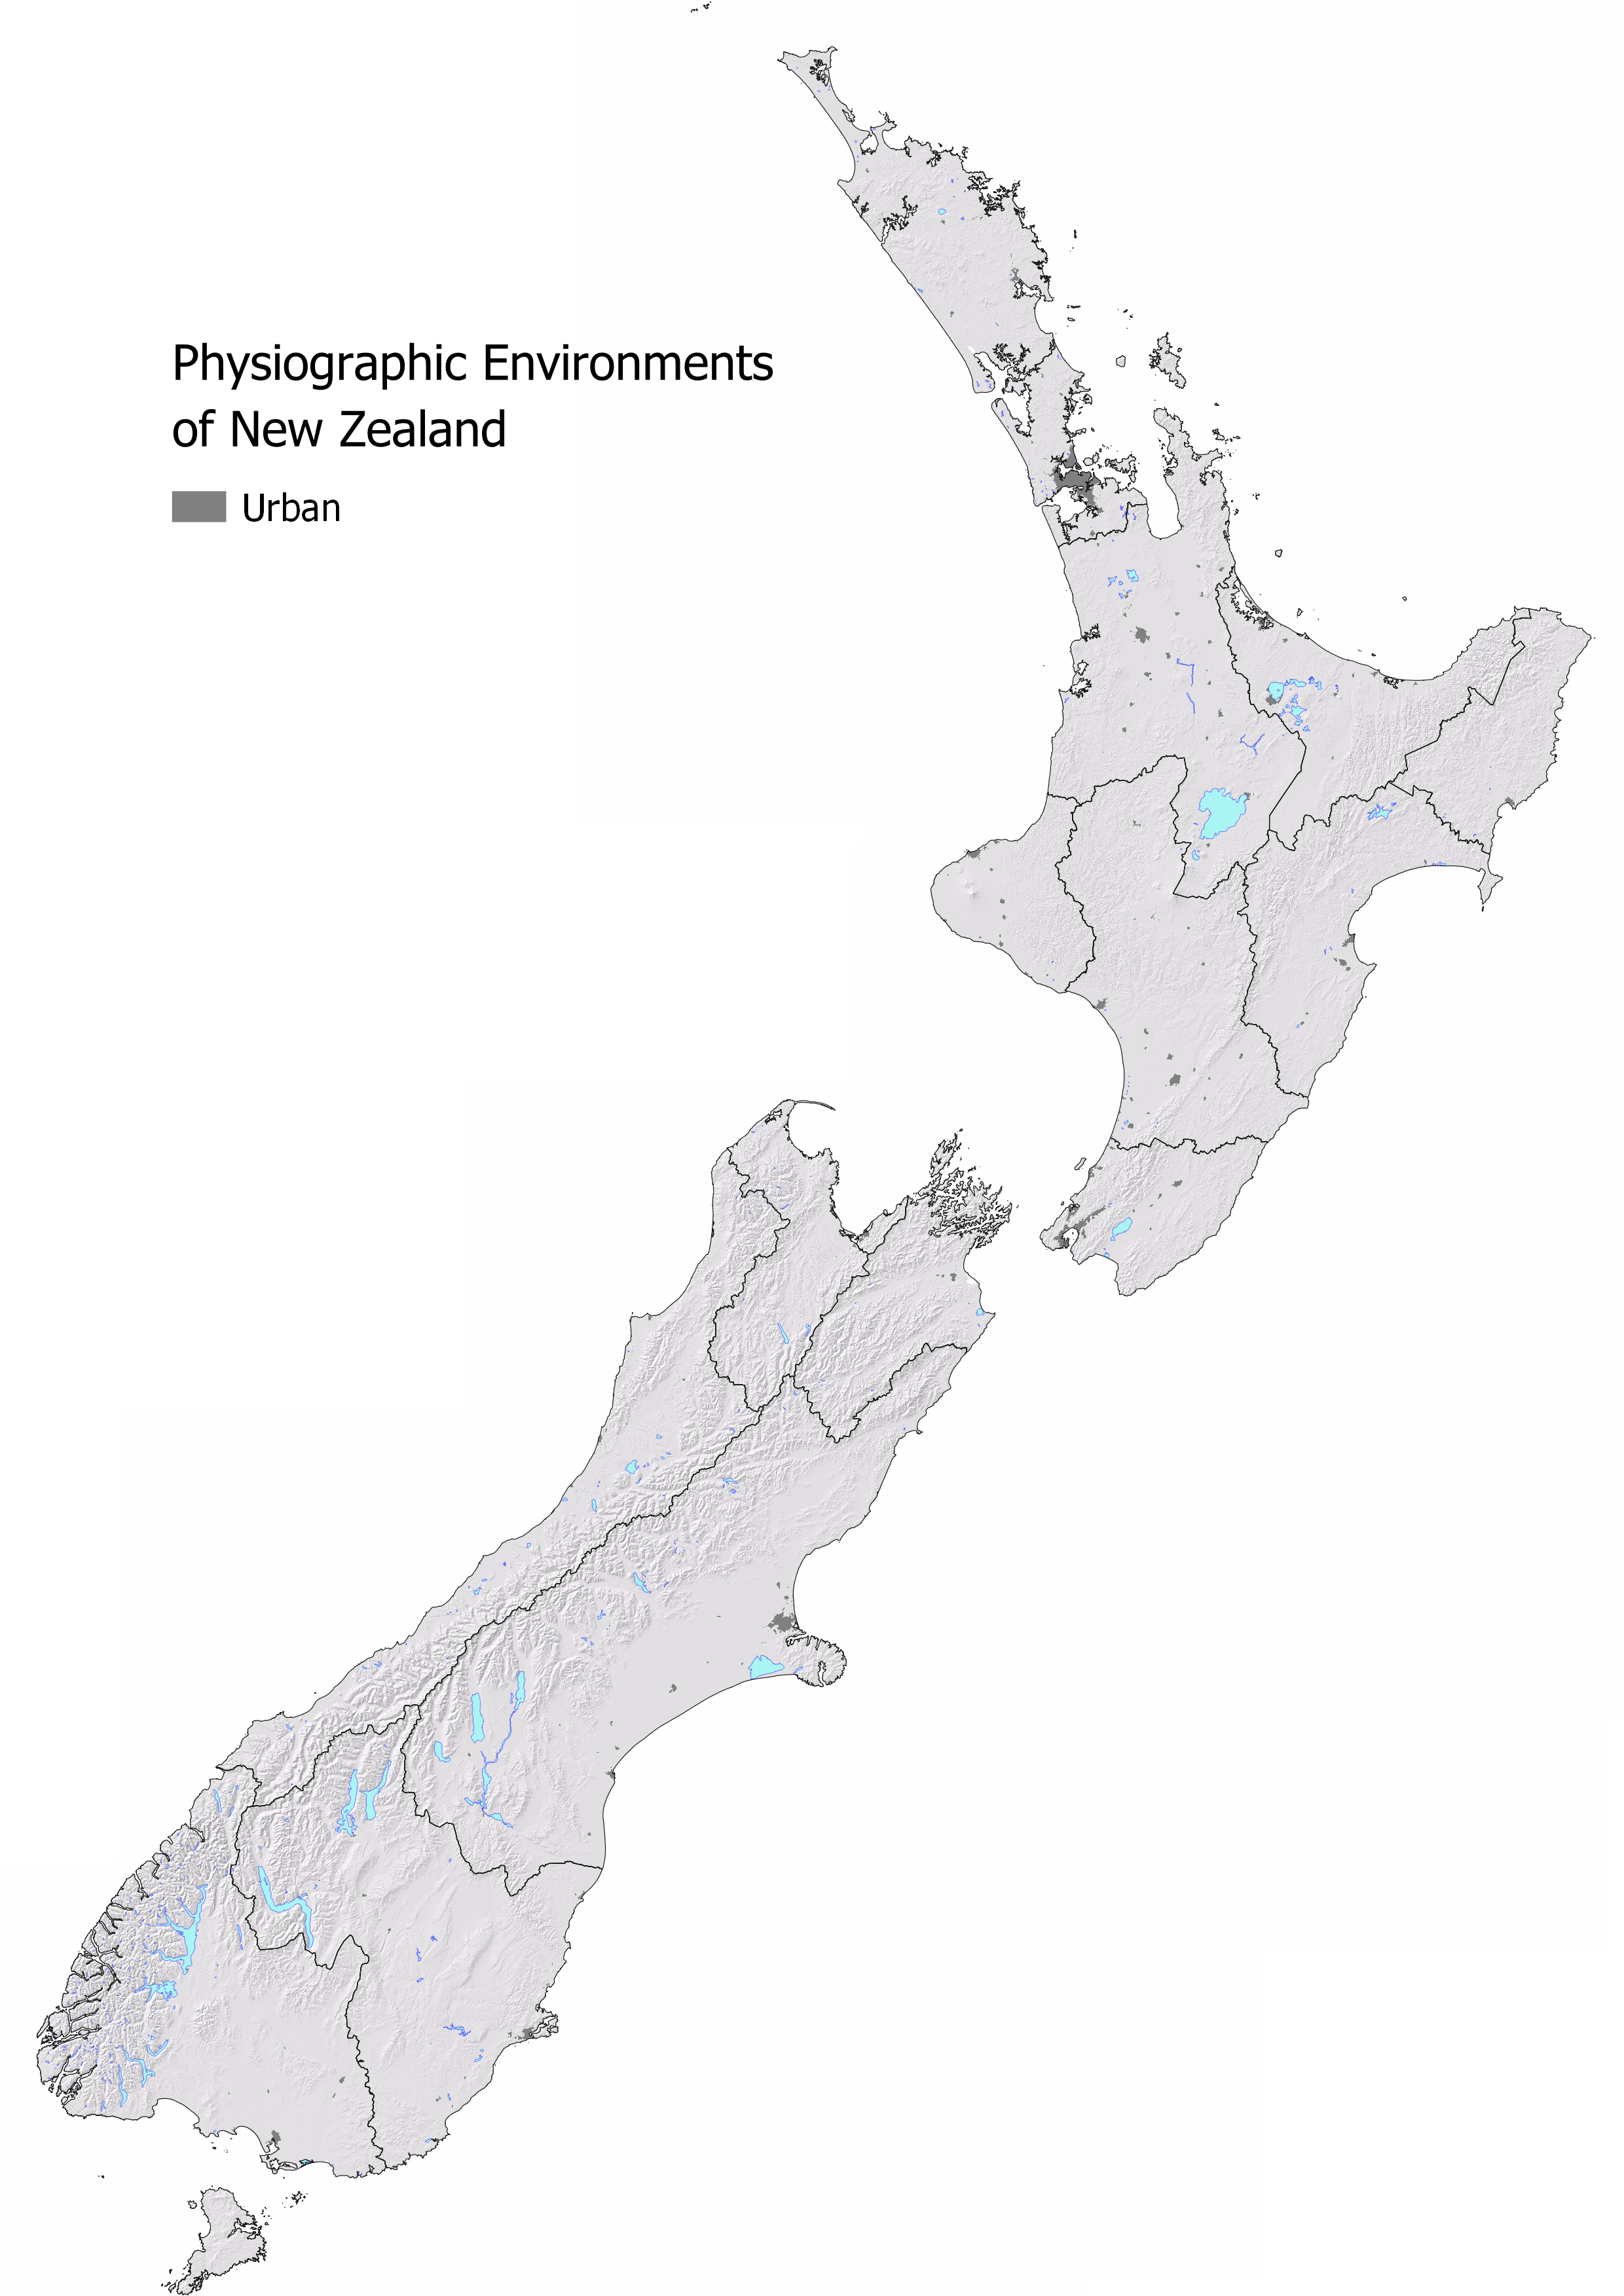 slope map of new zealand with the parts classified as 'Urban' showing.